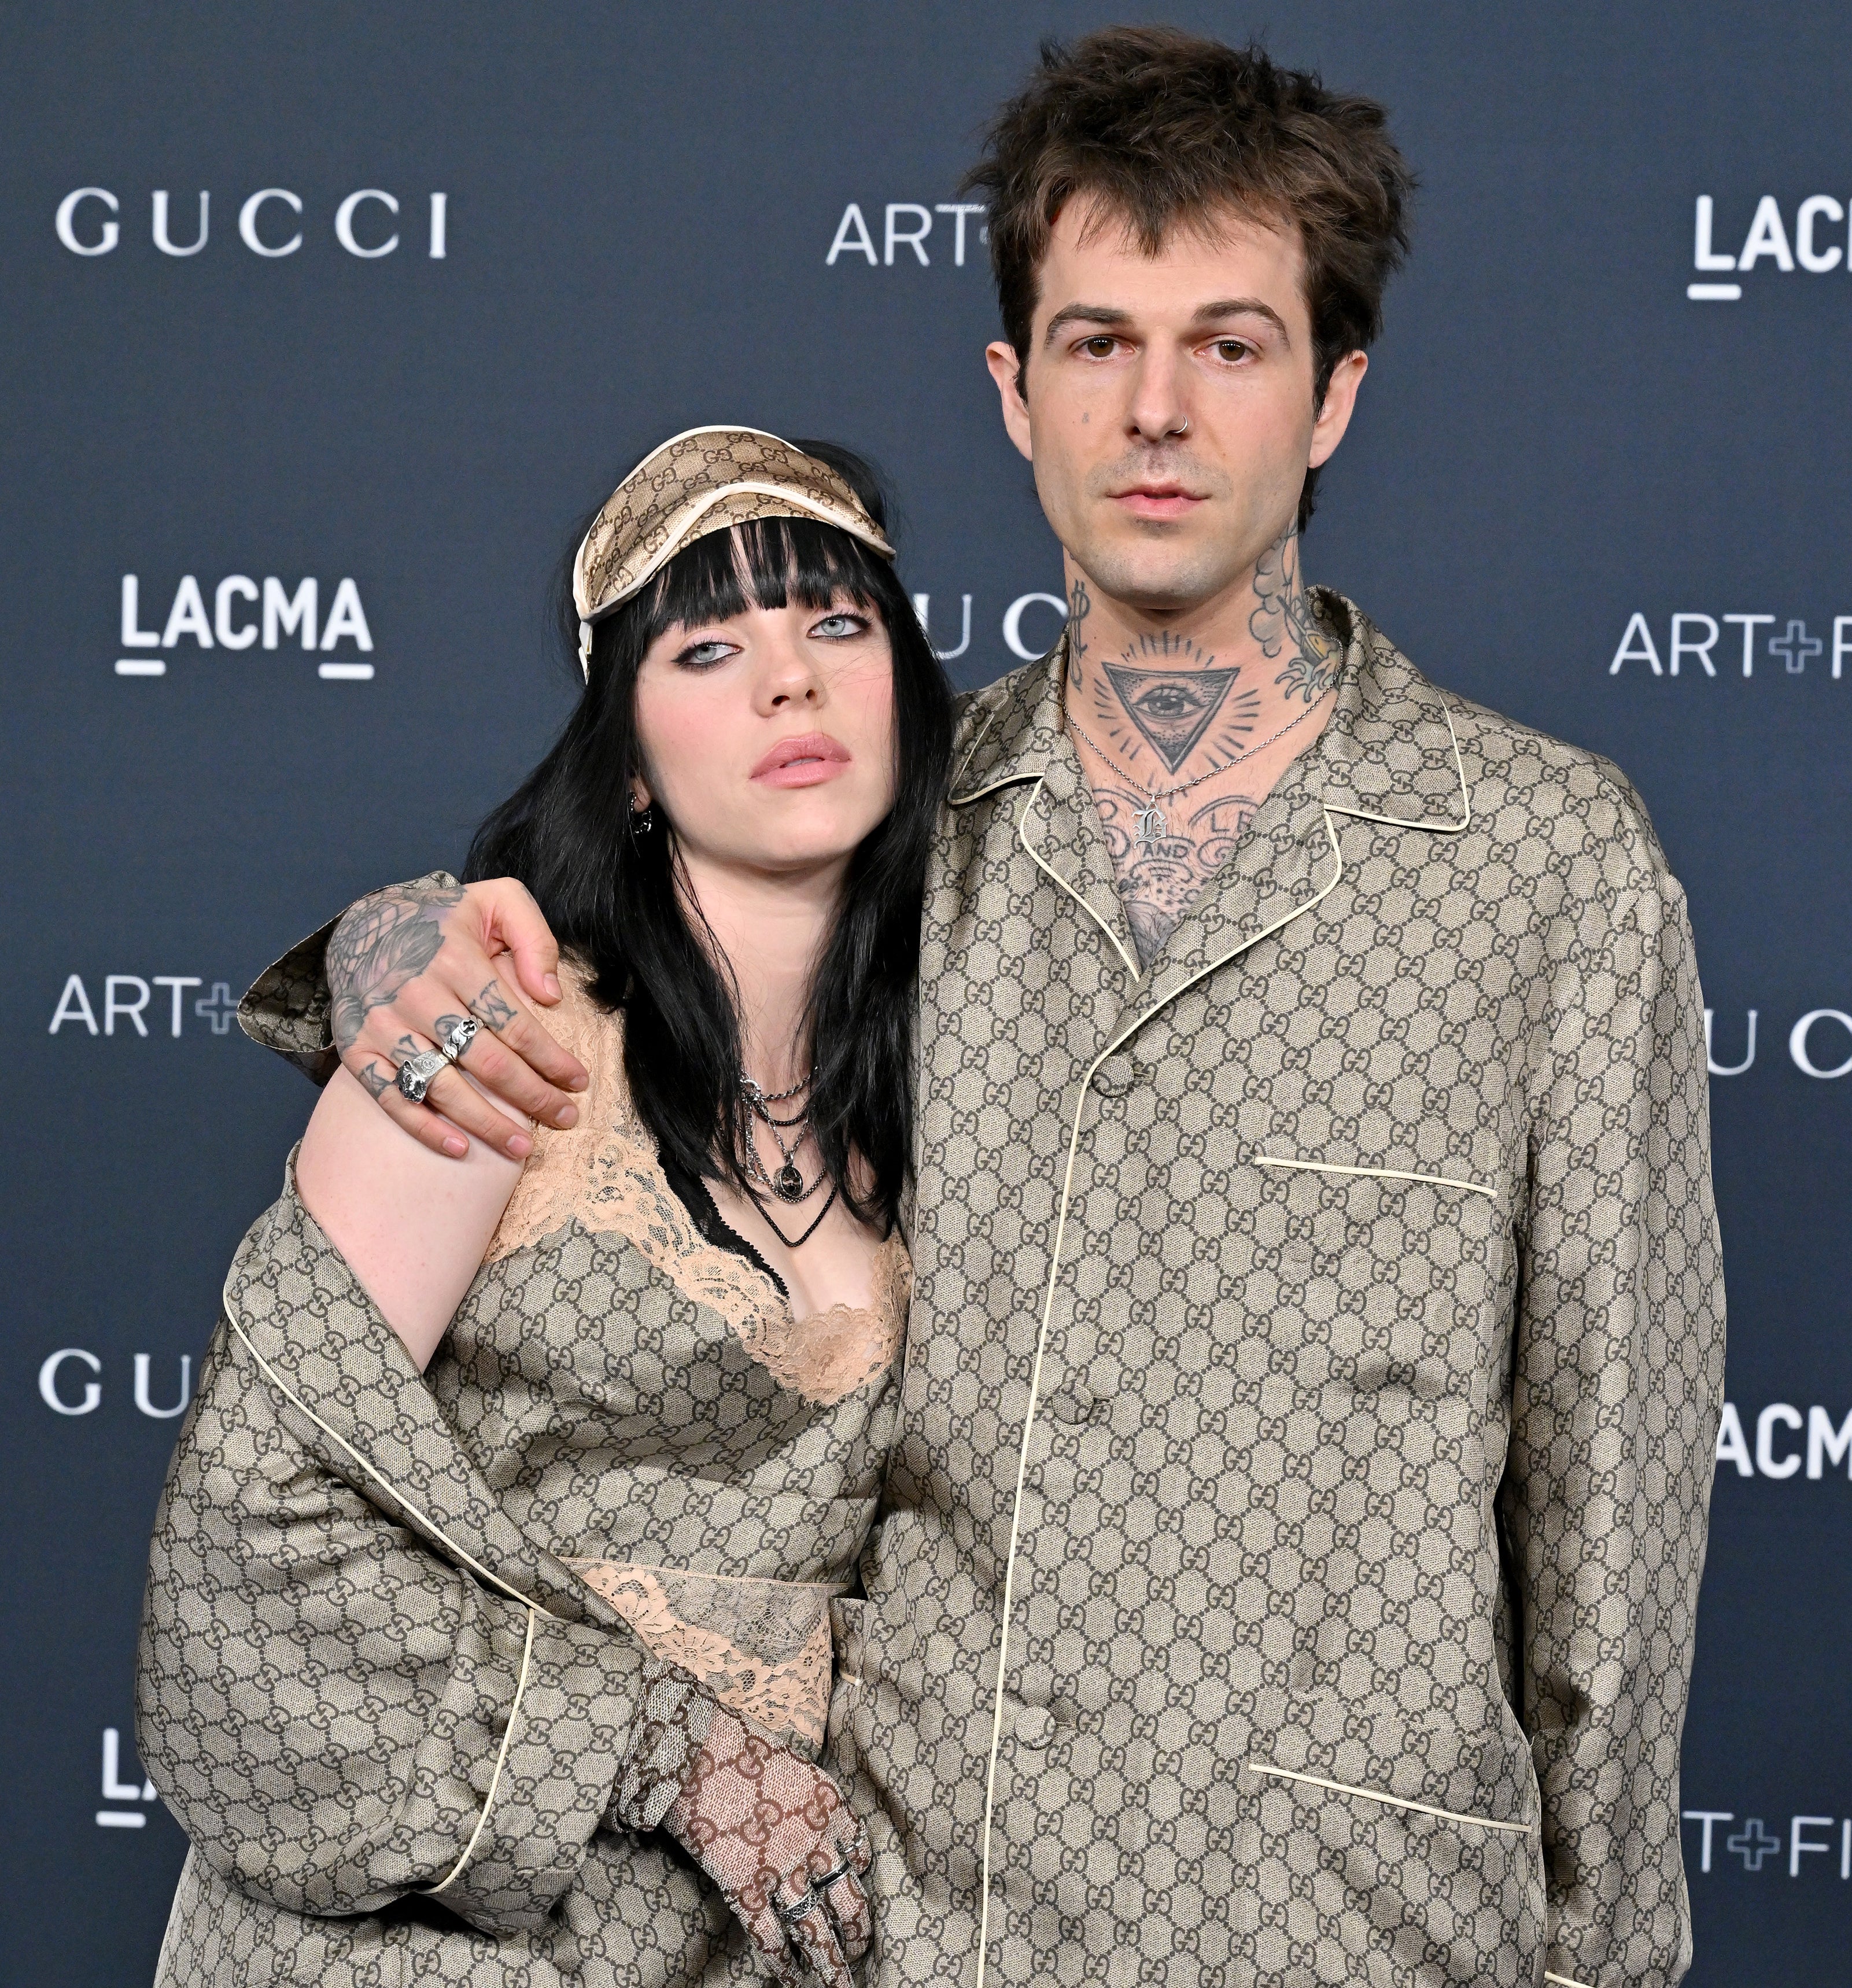 Billie and Jesse together at an event when they were dating